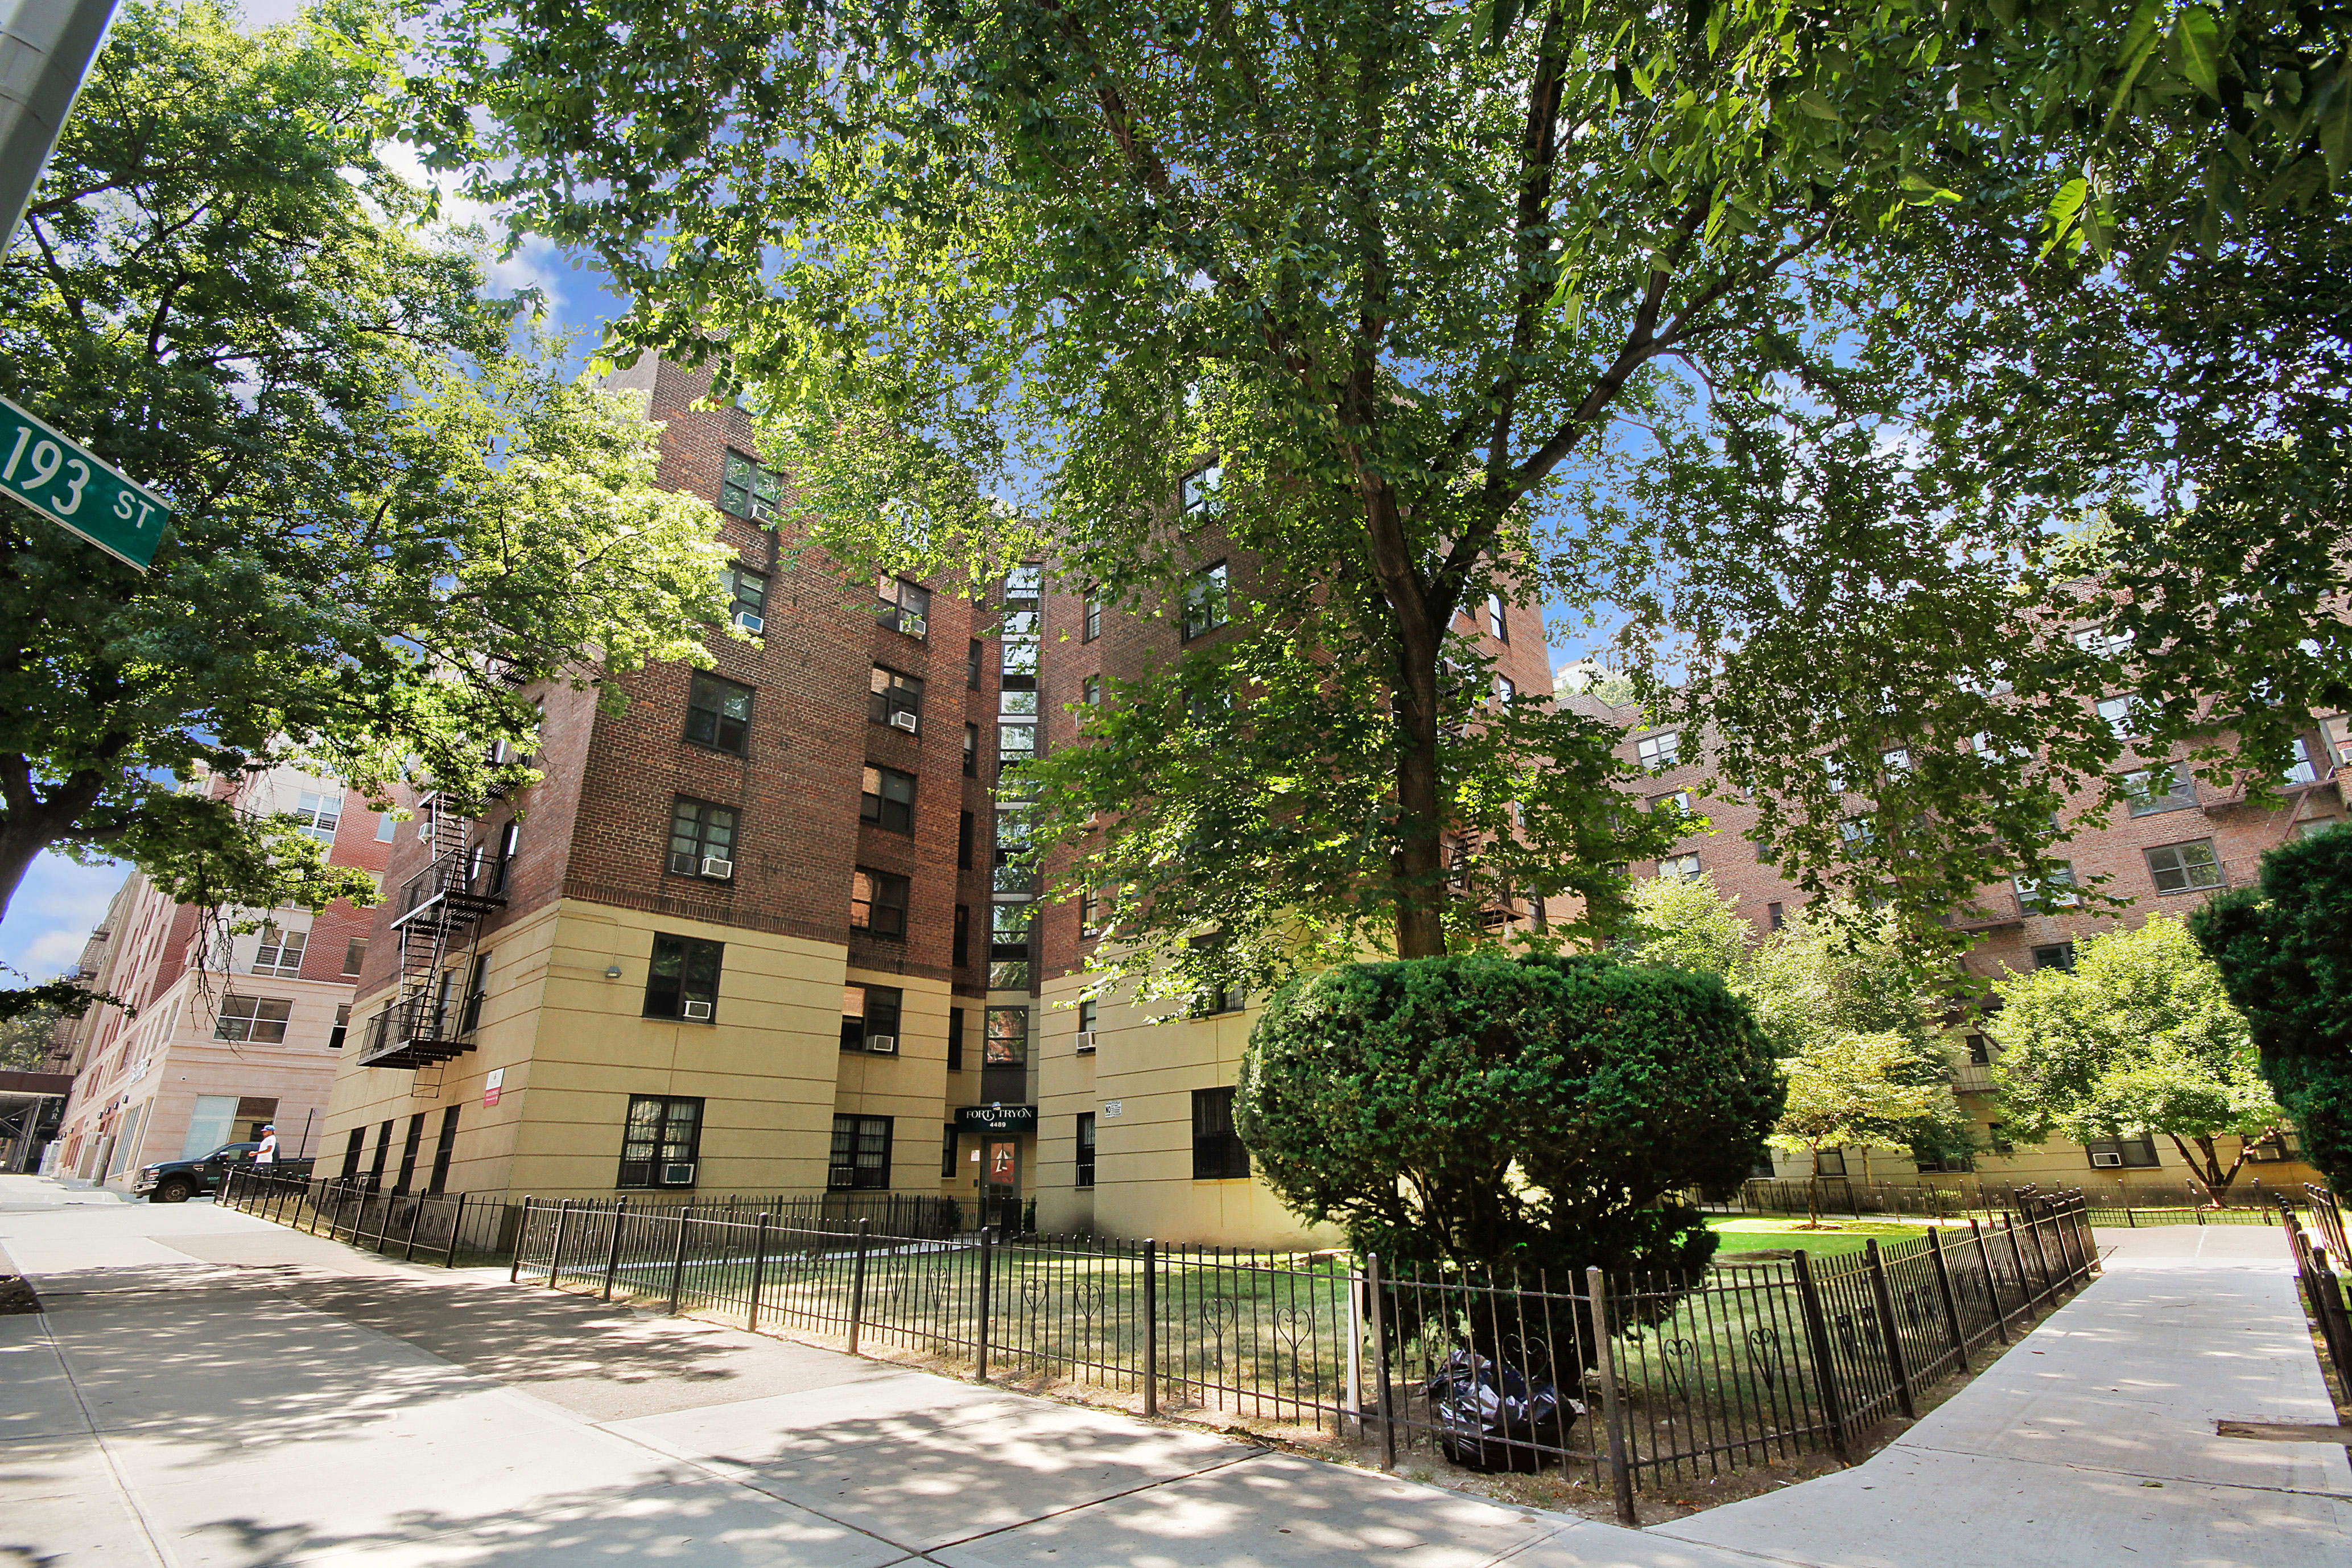 FORT TRYON APARTMENTS